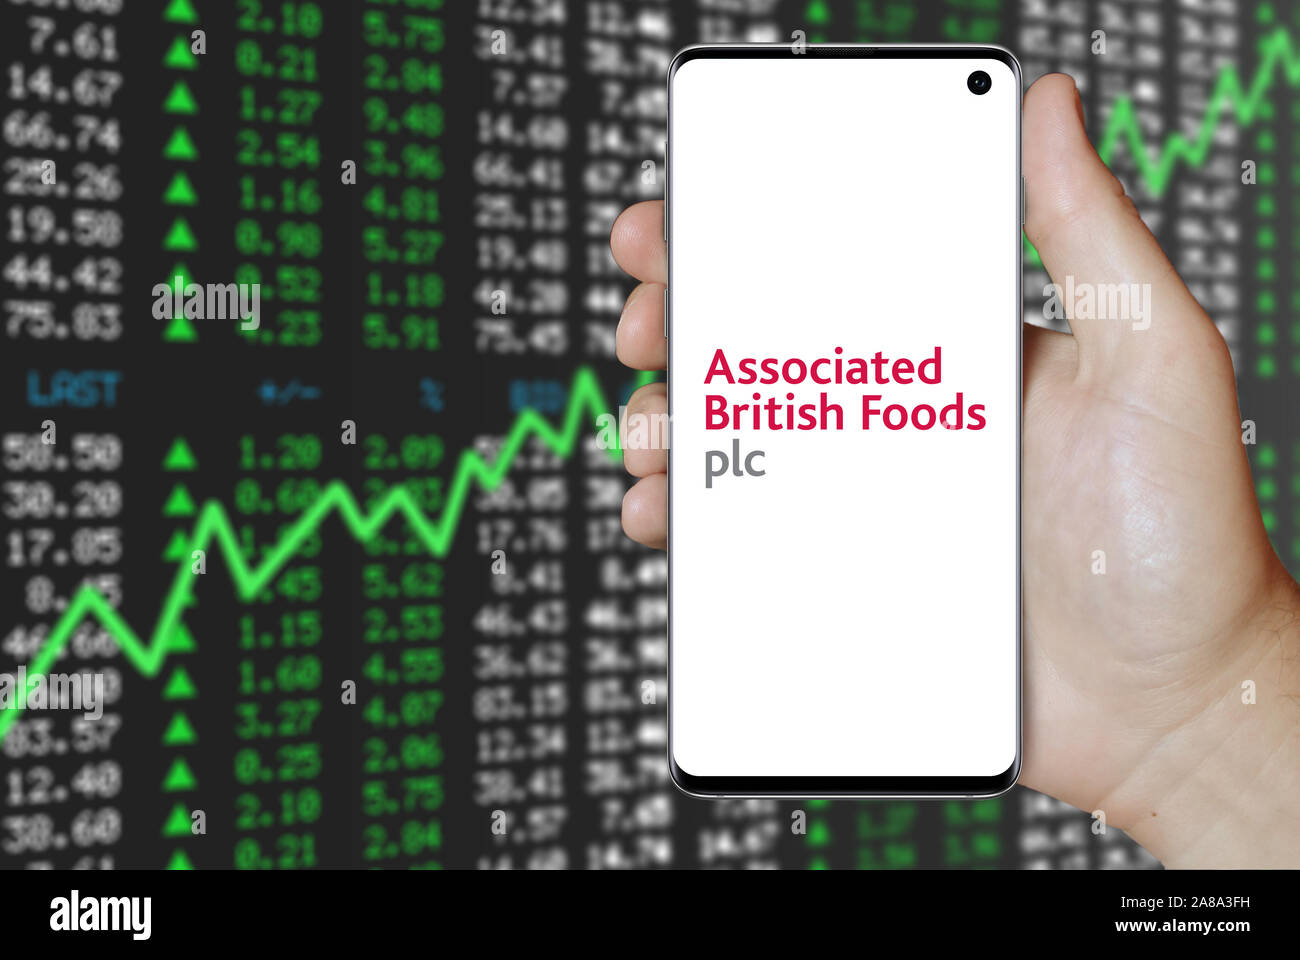 Logo of public company Associated British Foods displayed on a smartphone. Positive stock market background. Credit: PIXDUCE Stock Photo